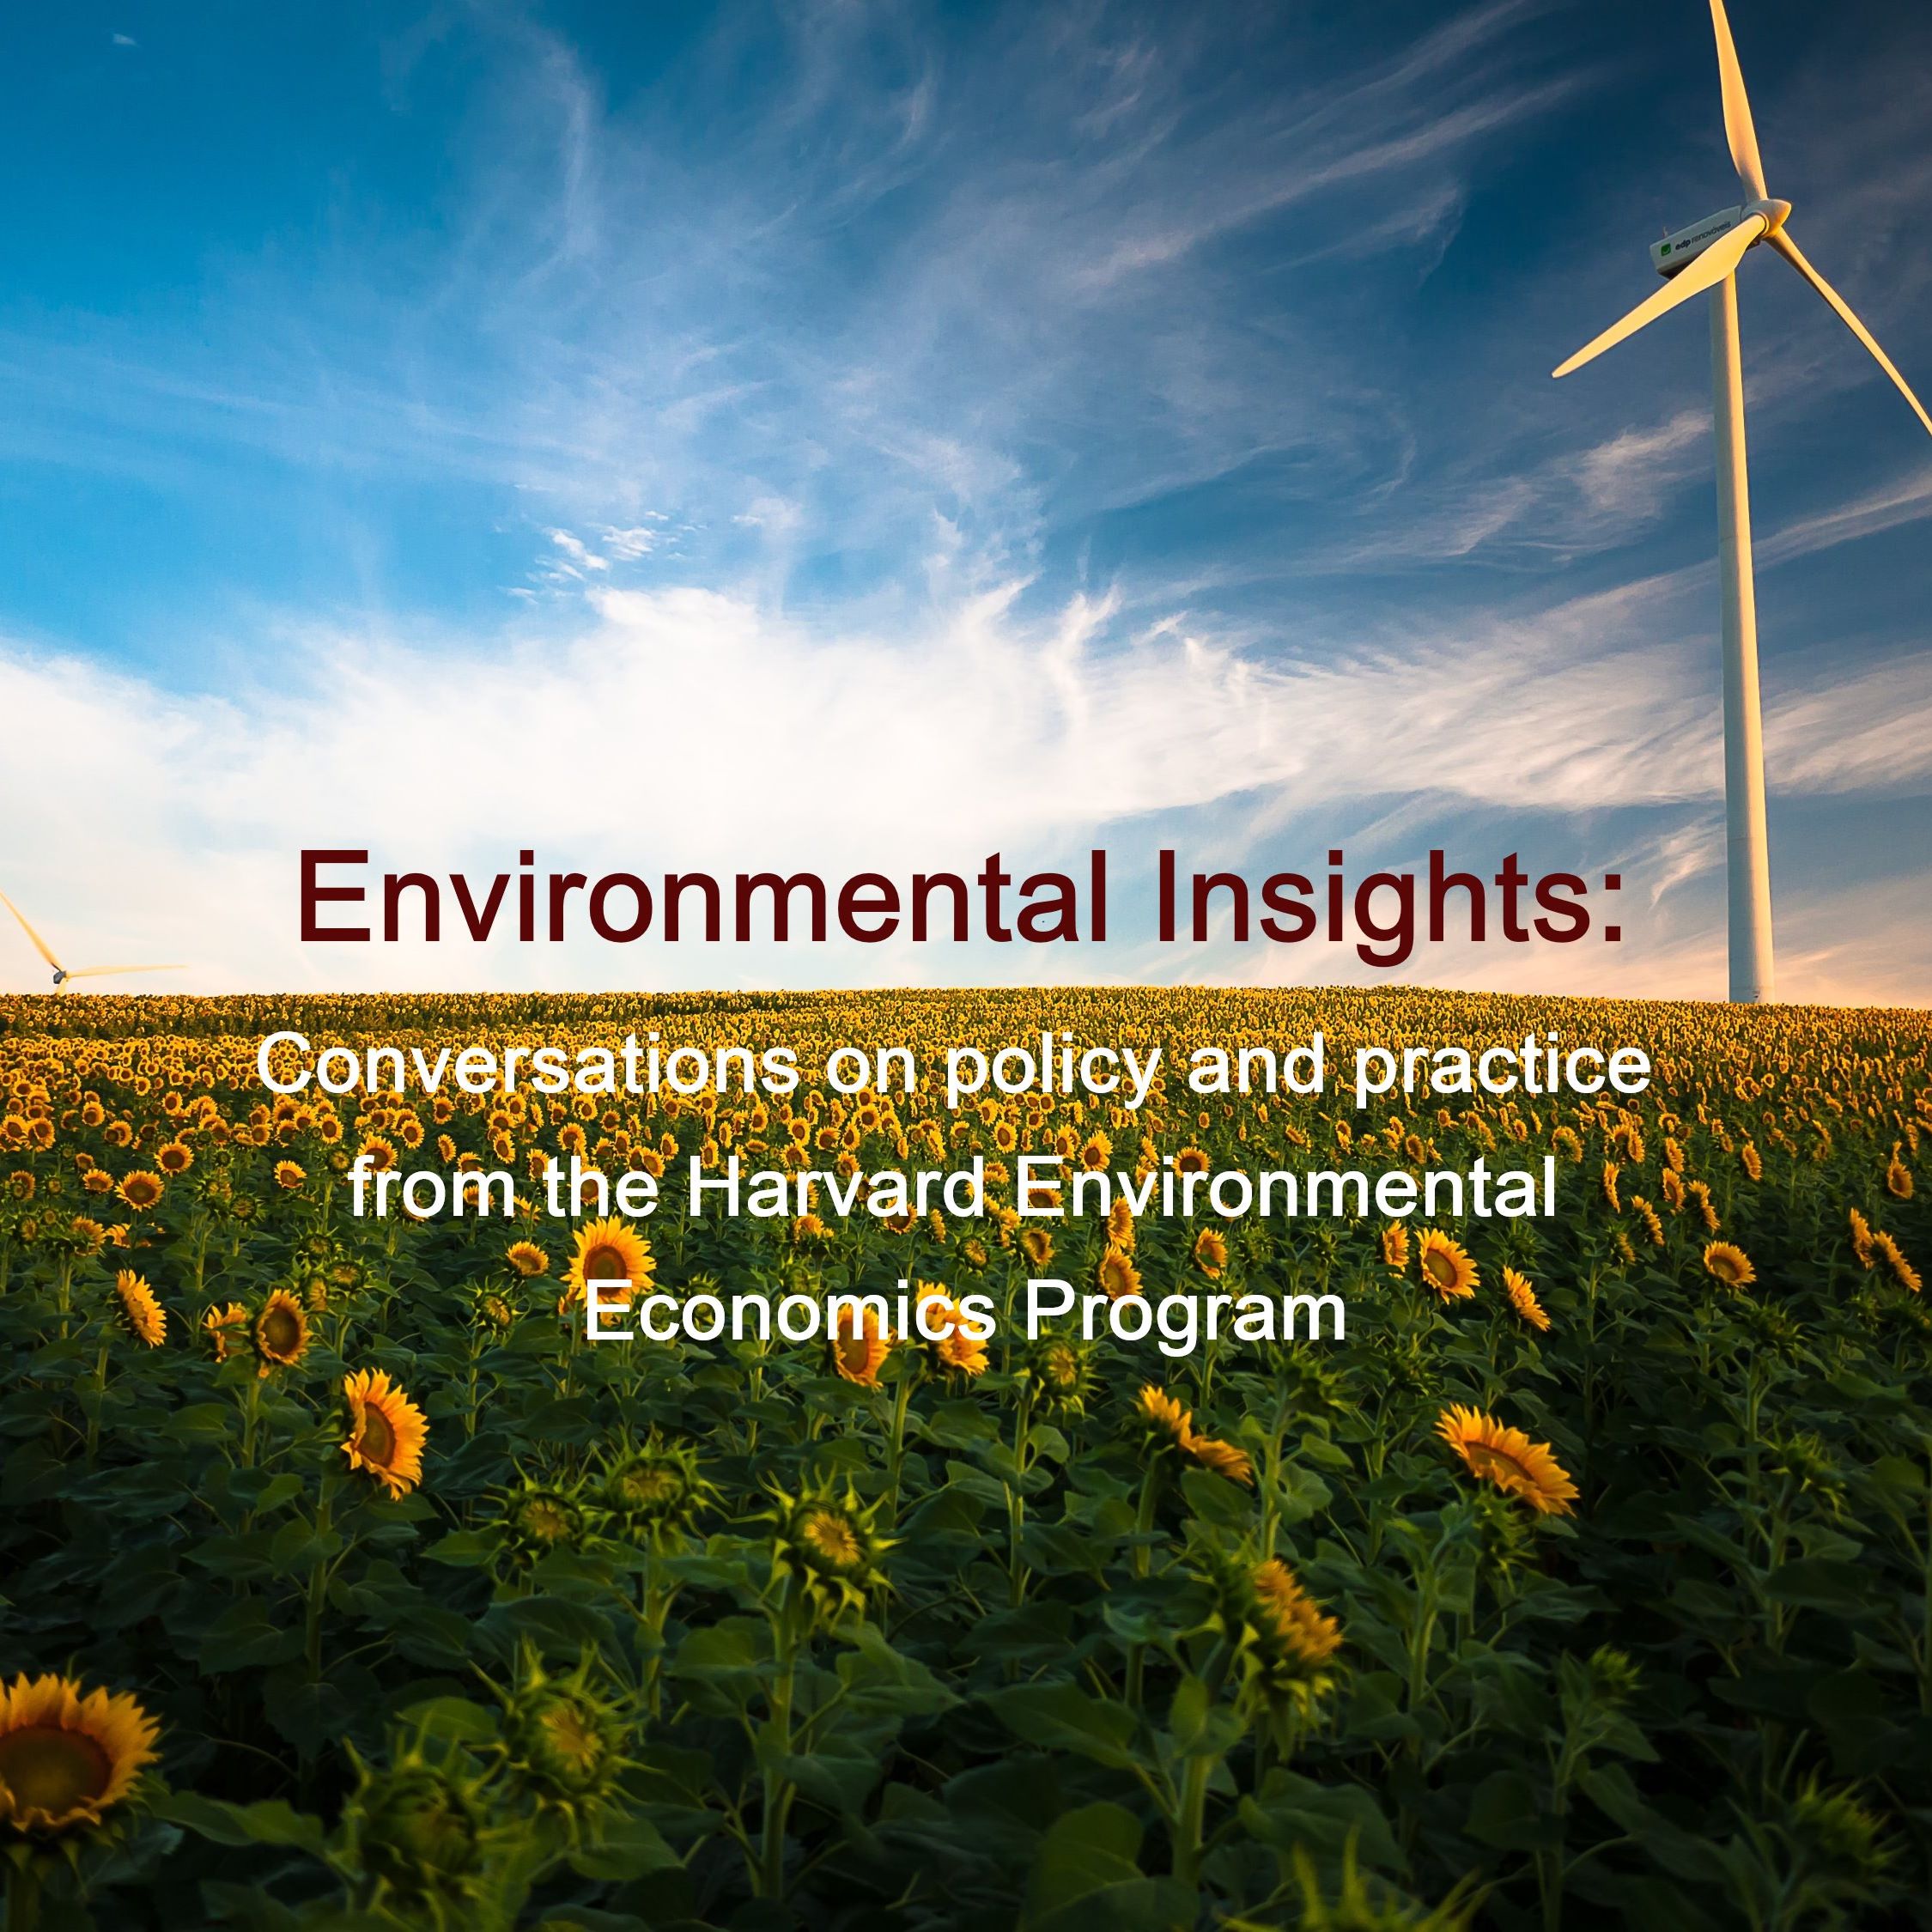 Environmental Insights: Conversations on policy and practice from the Harvard Environmental Economic